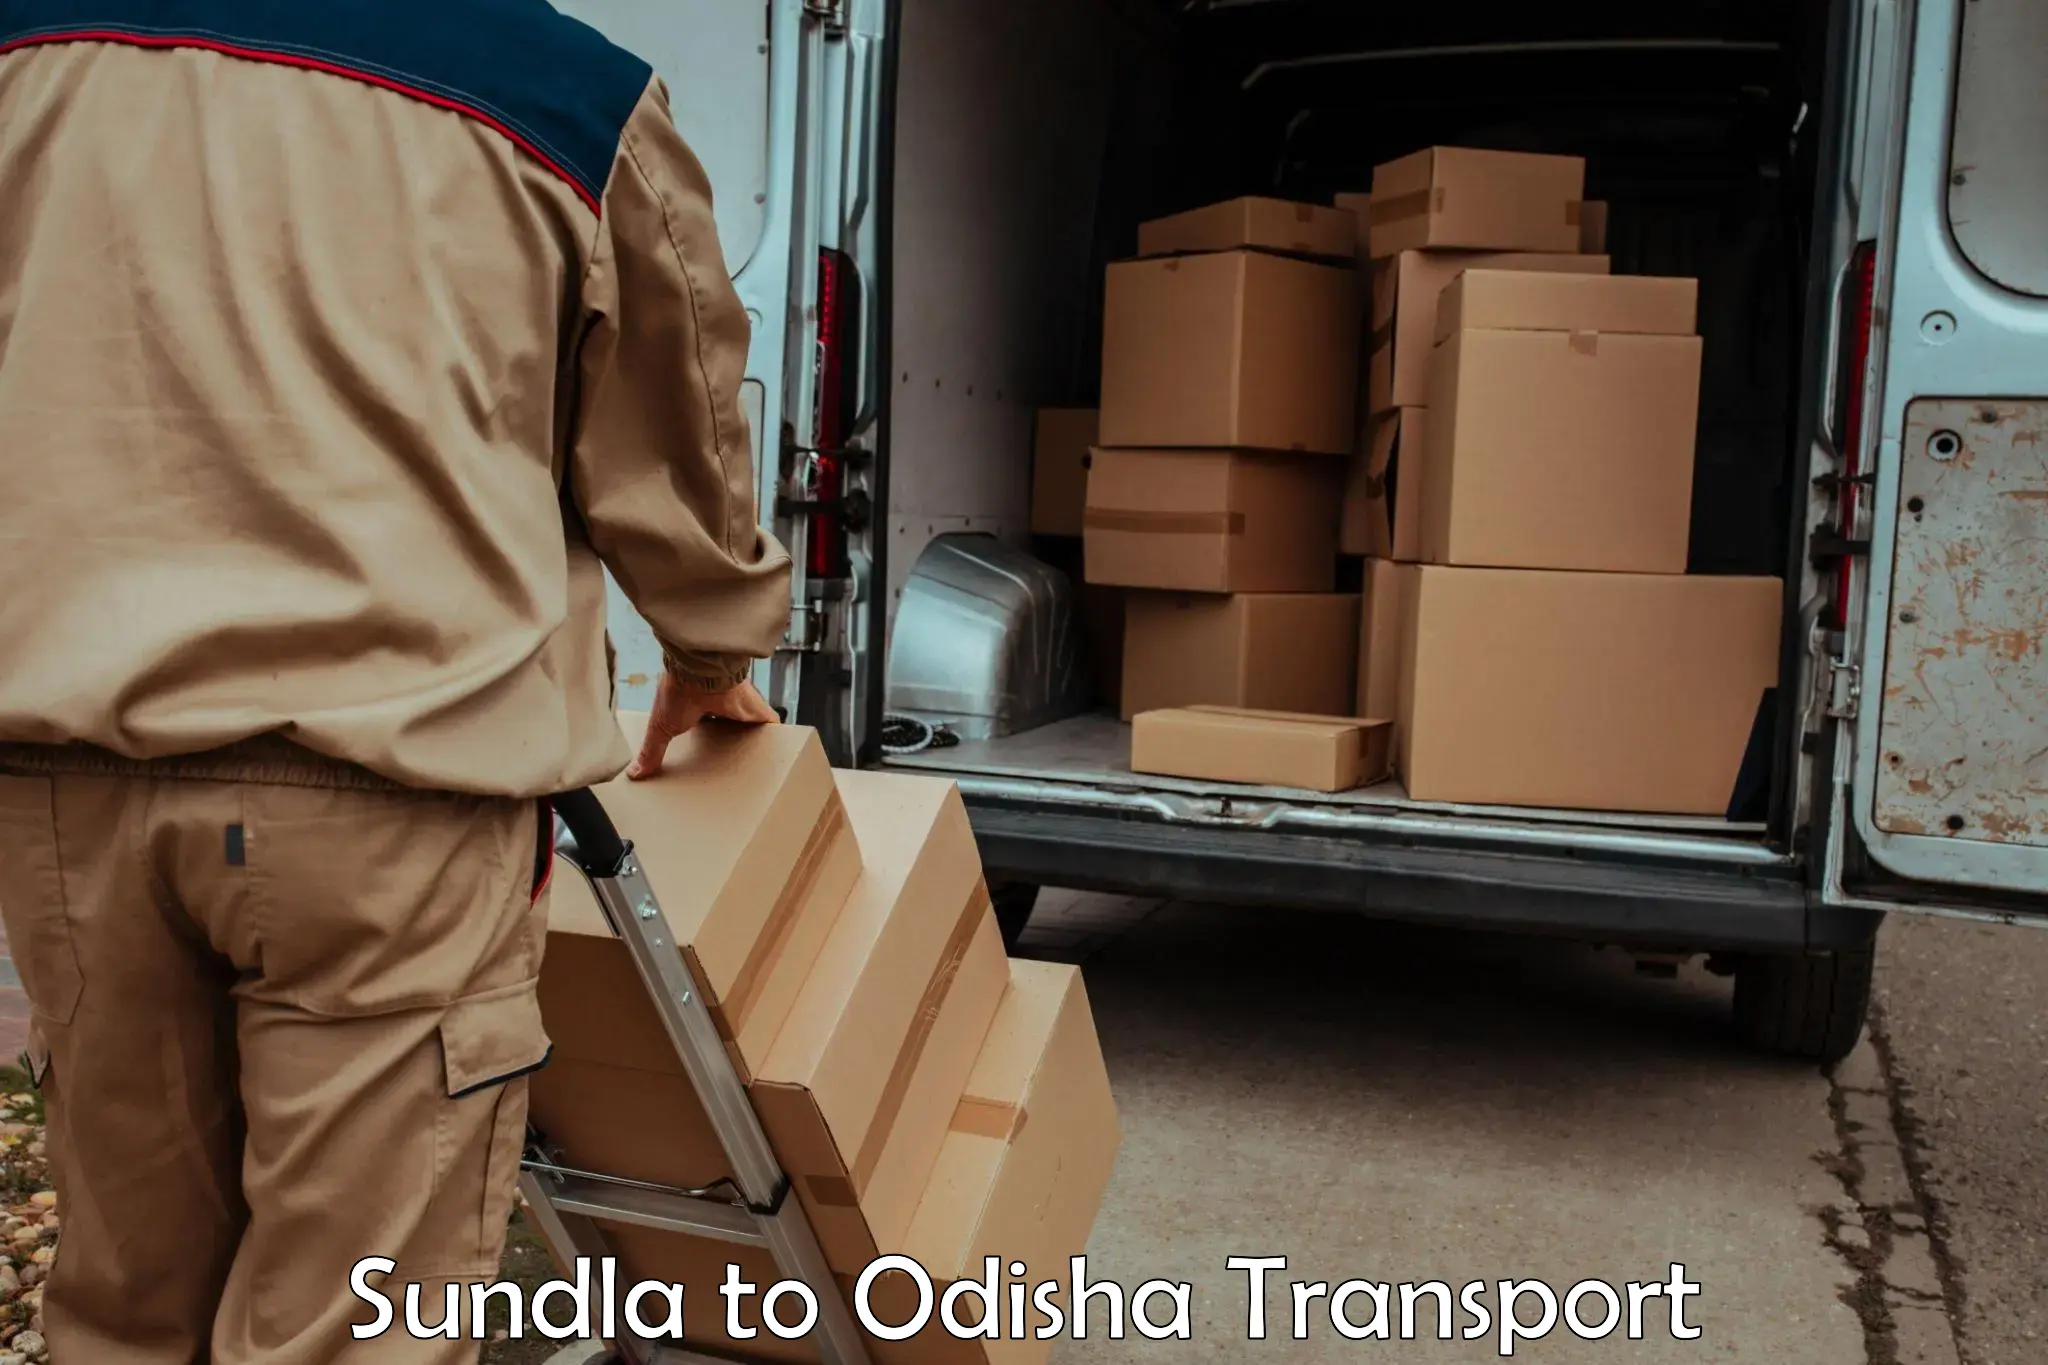 Air freight transport services Sundla to Chandipur